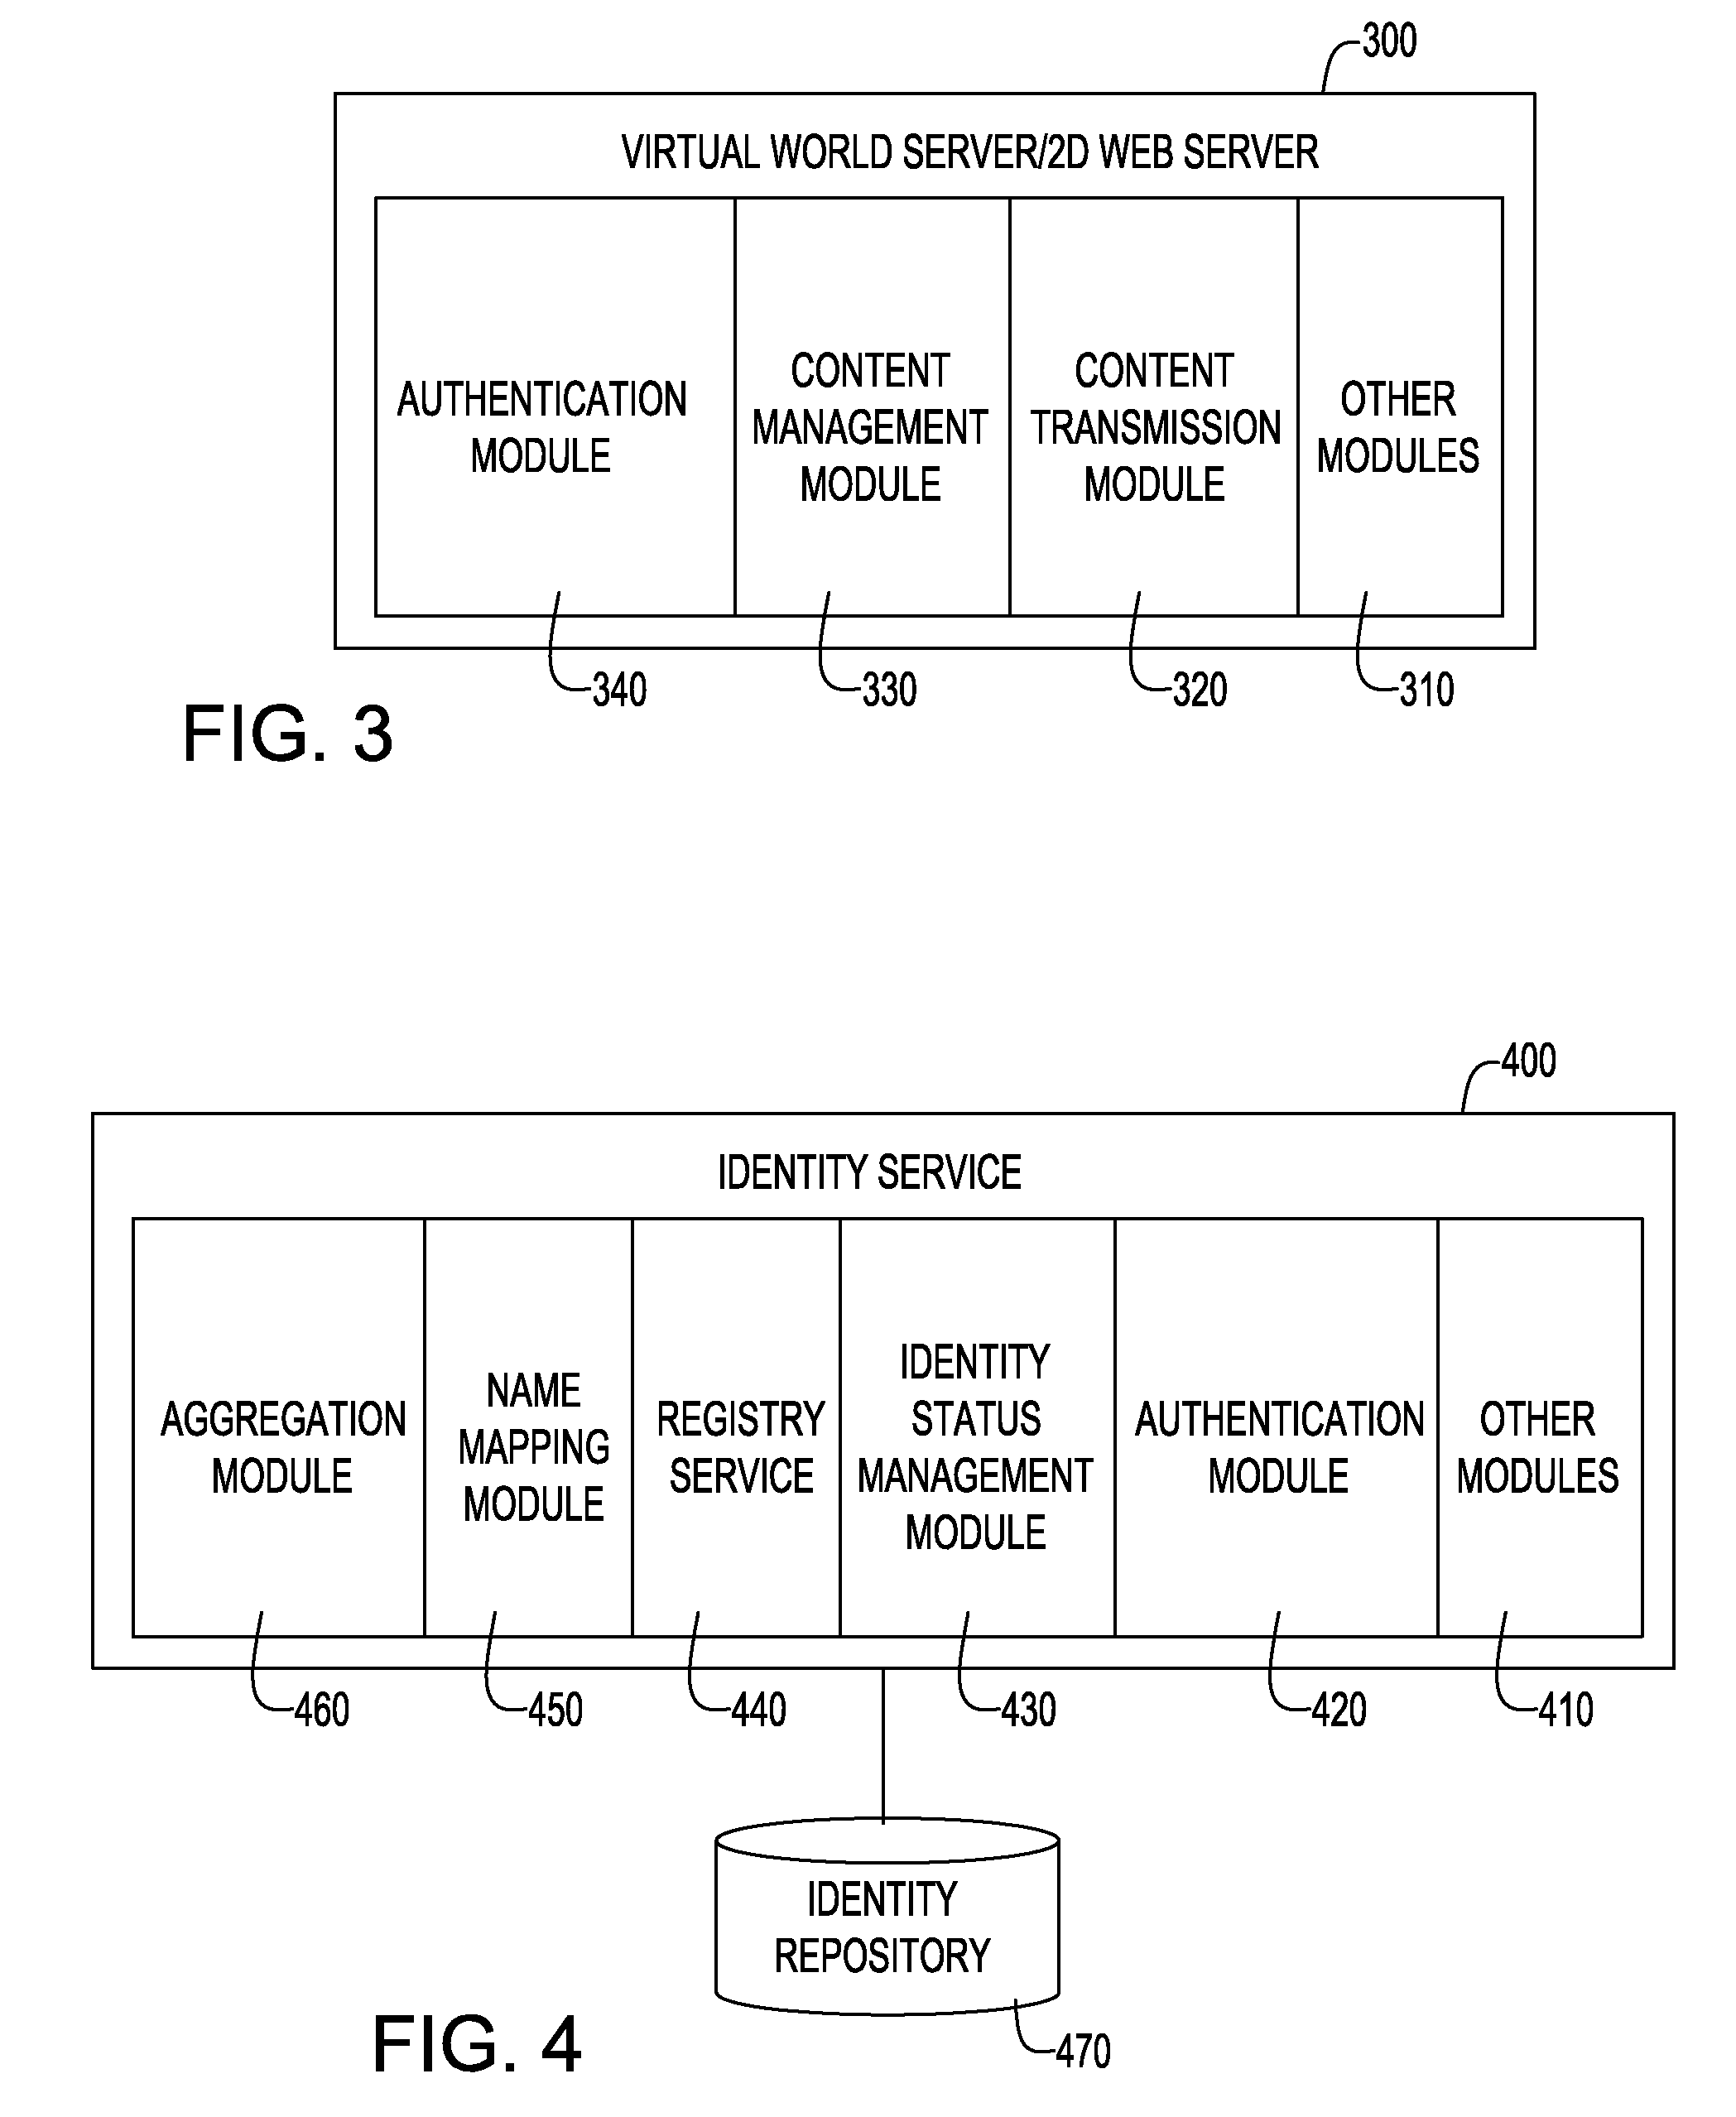 Apparatus and method of identity and virtual object management and sharing among virtual worlds